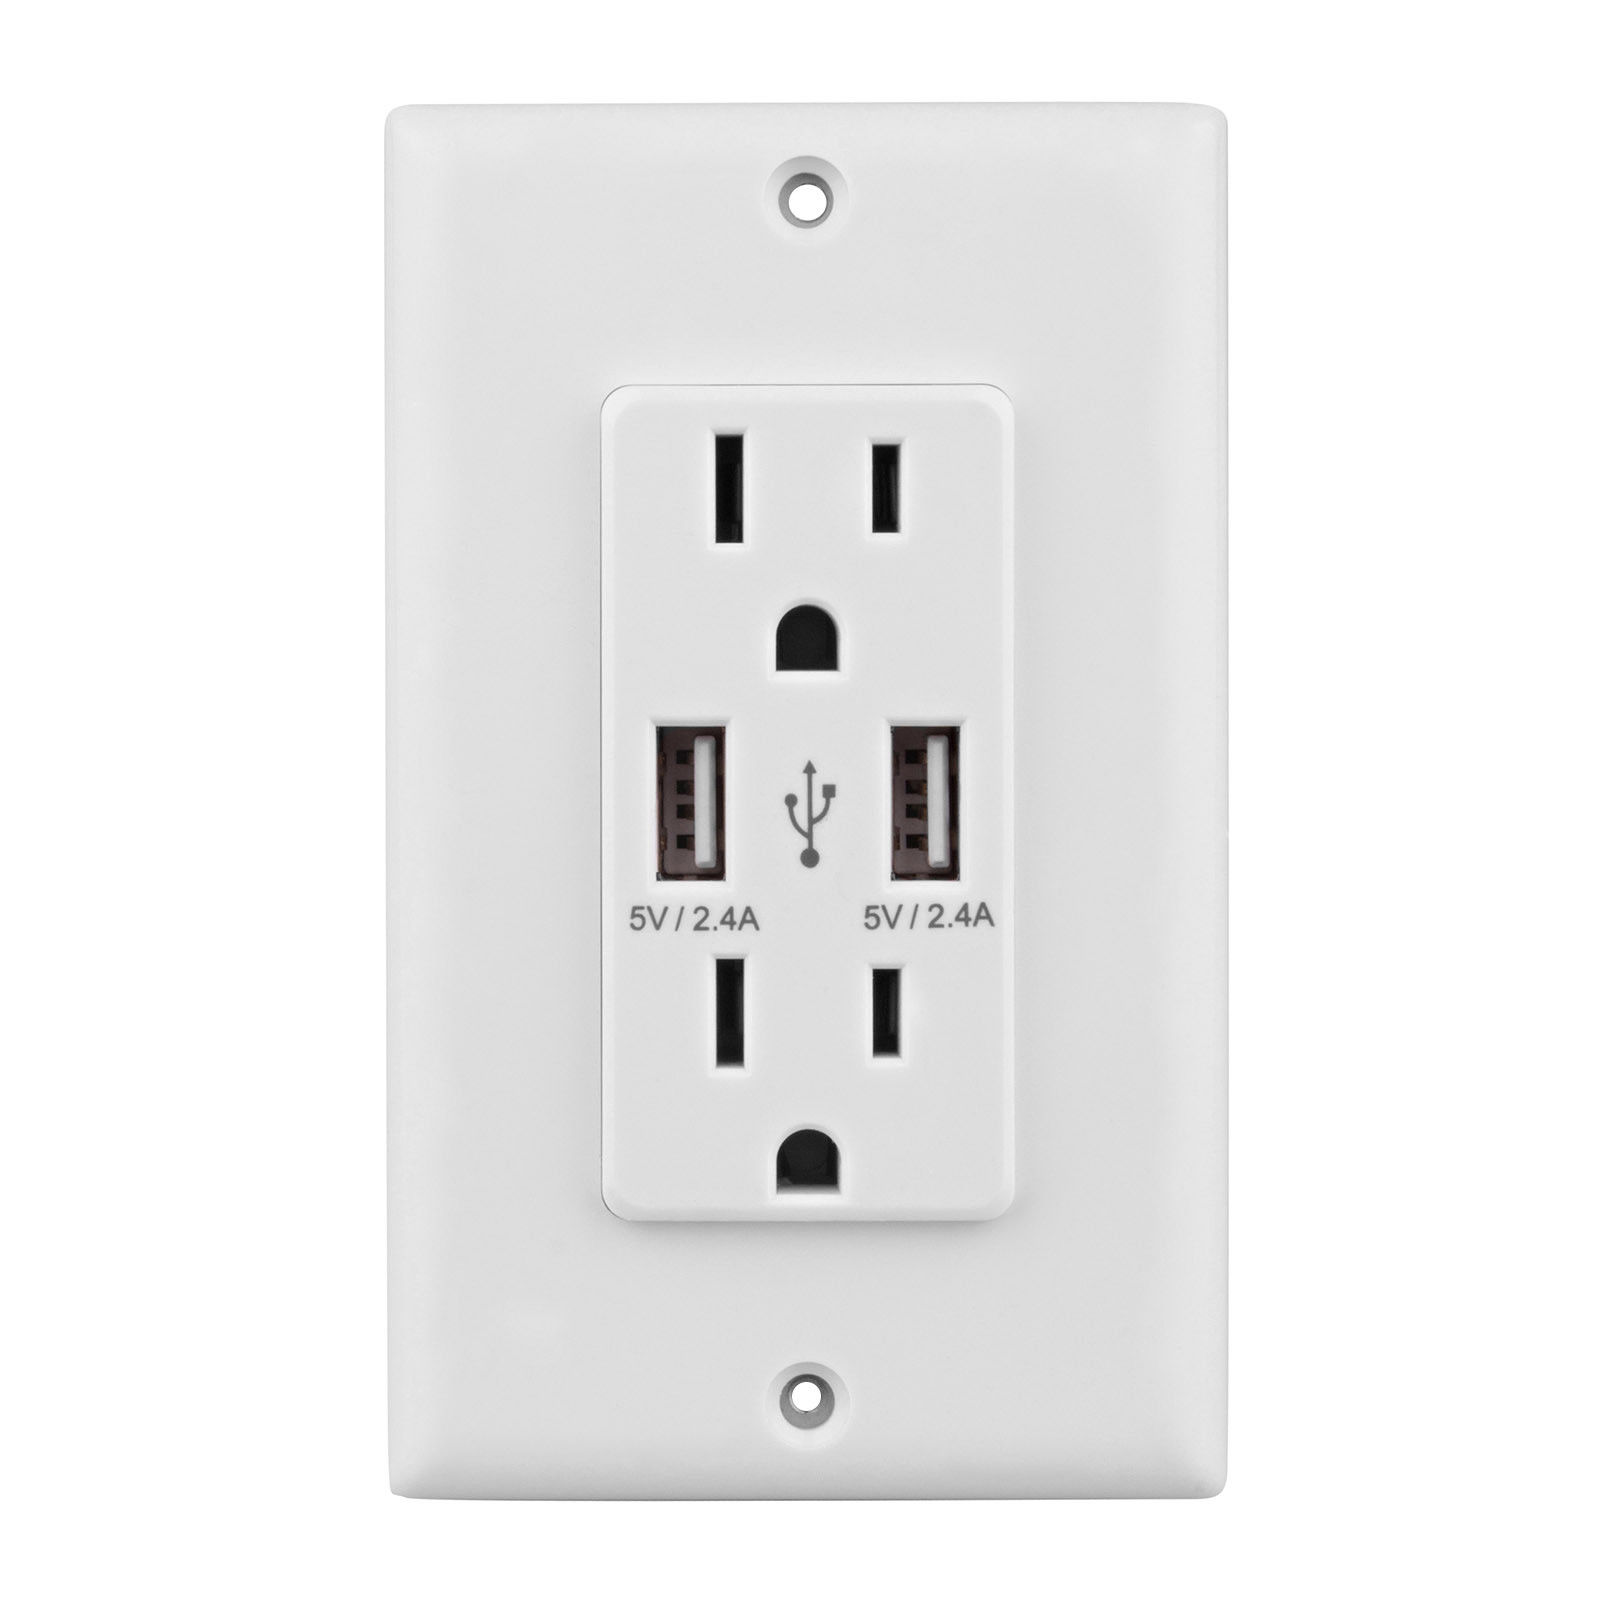 Dual 2.4a 2-Port Rapid Charging USB Wall Outlet & Conventional Wall ...